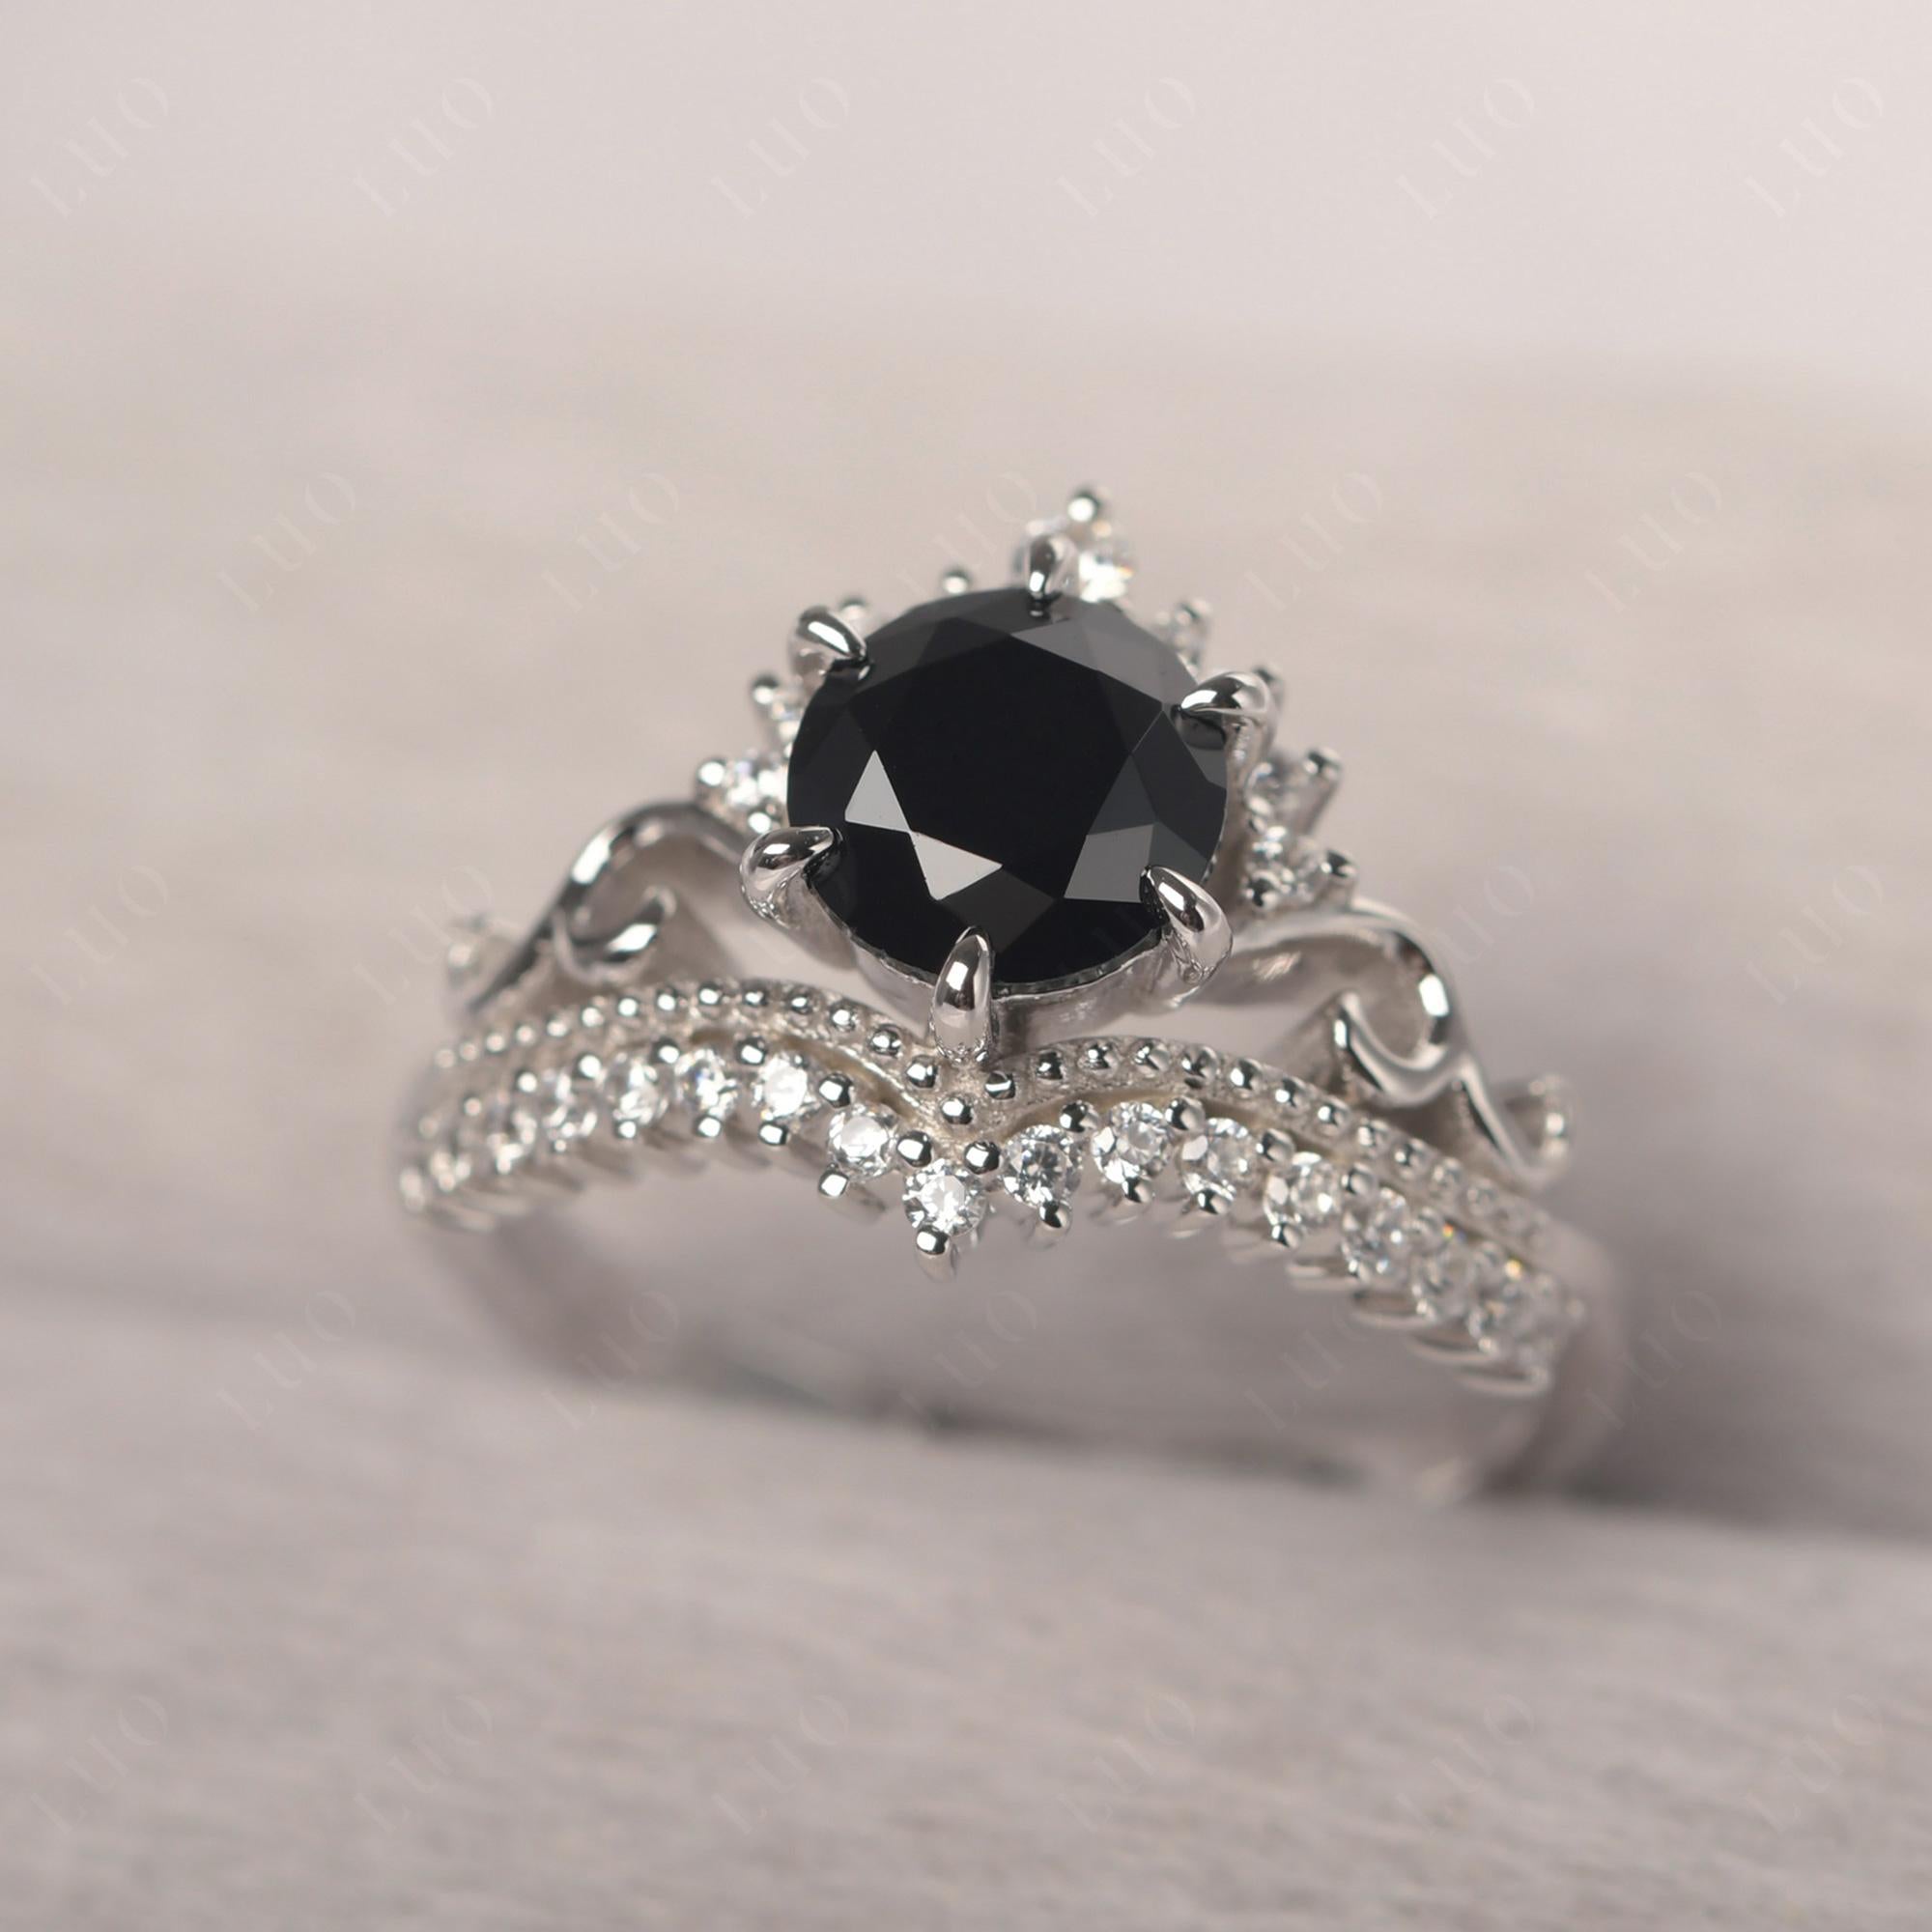 Vintage Black Stone Cocktail Ring - LUO Jewelry